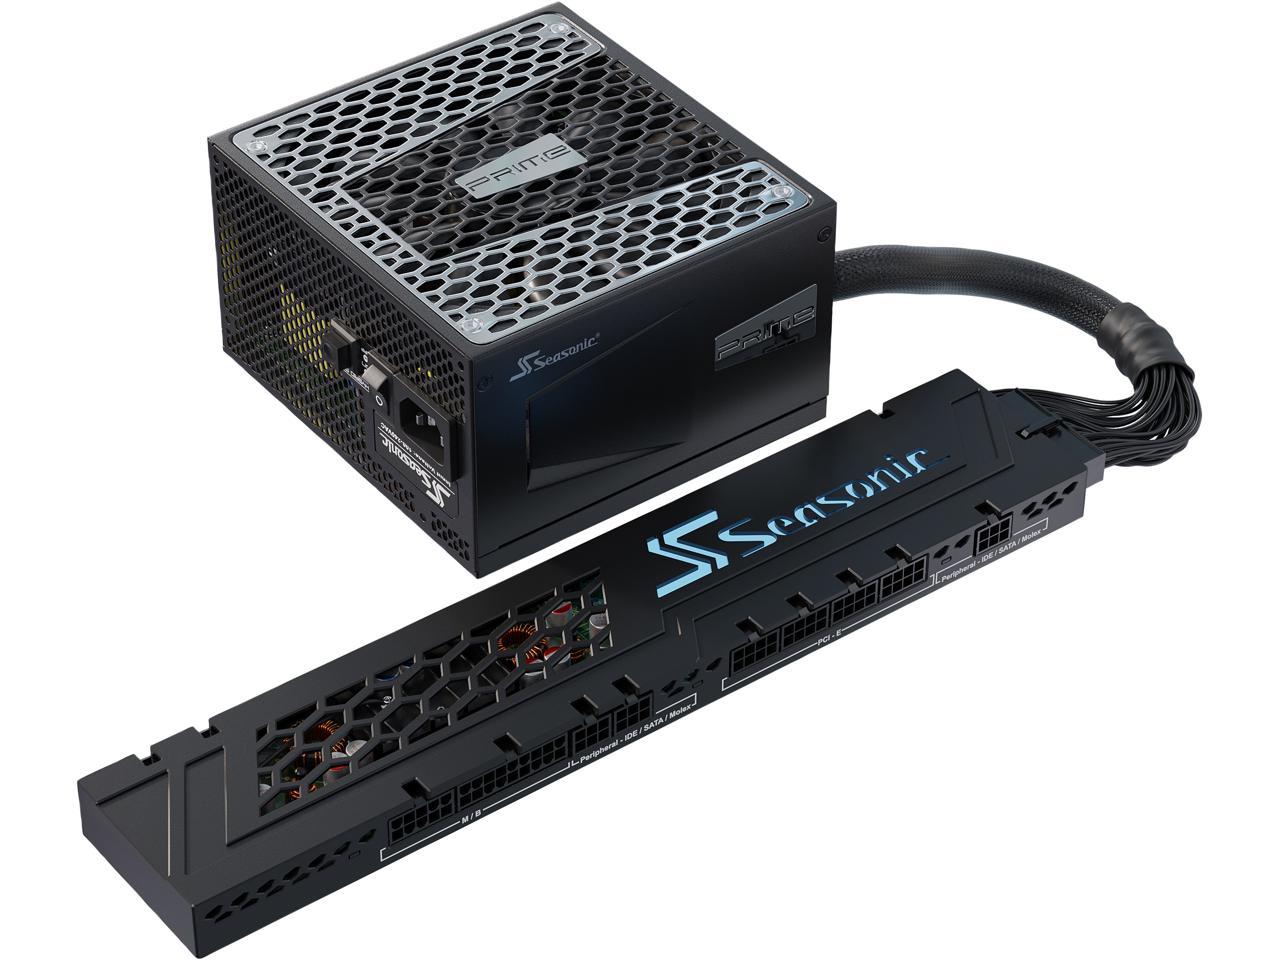 750W Seasonic CONNECT Comprise PRIME 80+ Gold Power Supply and Backplane @Newegg (AR) $75